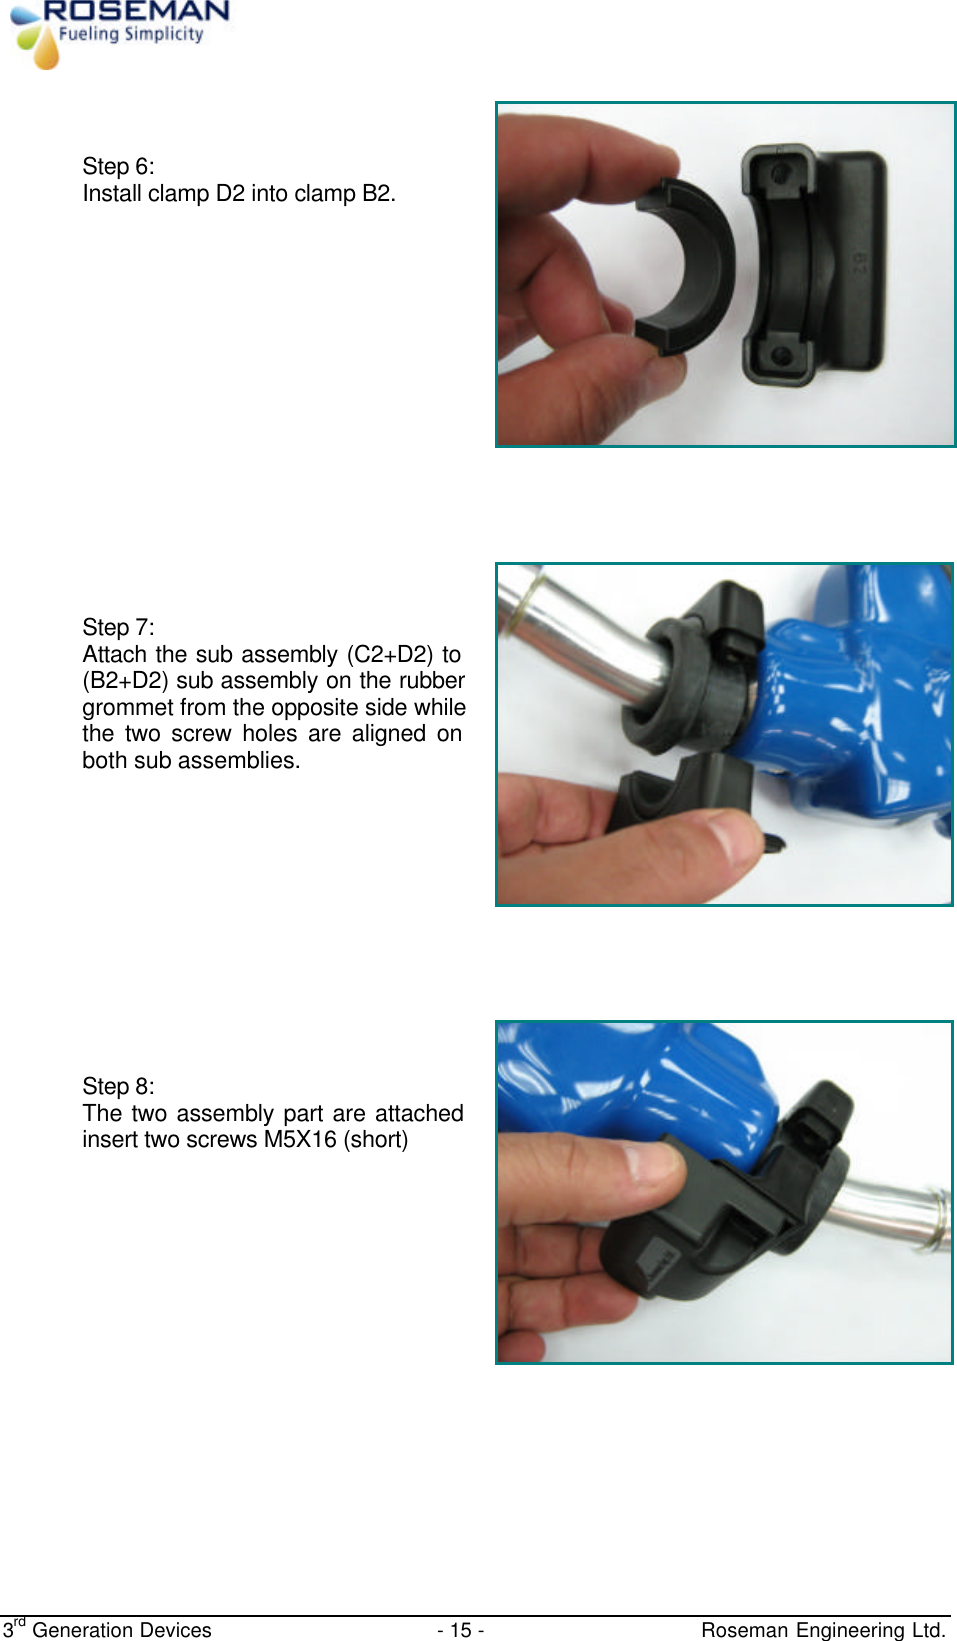  3rd Generation Devices - 15 -   Roseman Engineering Ltd.    Step 6: Install clamp D2 into clamp B2.           Step 7: Attach the sub assembly (C2+D2) to (B2+D2) sub assembly on the rubber grommet from the opposite side while the two screw holes are aligned on both sub assemblies.          Step 8:  The two assembly part are attached insert two screws M5X16 (short)     